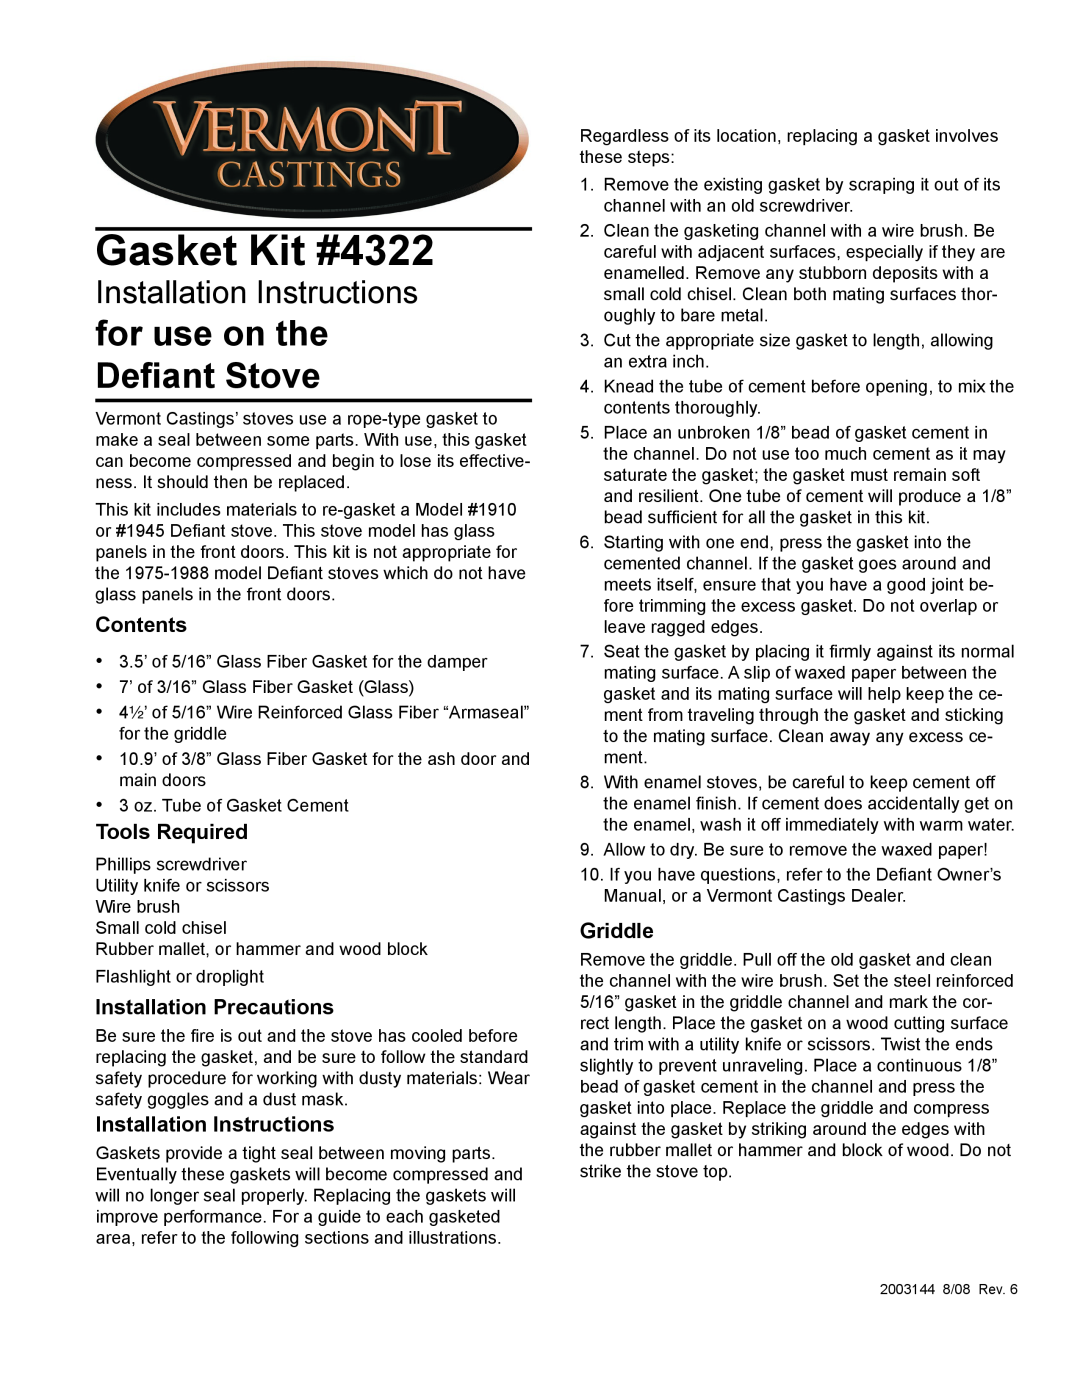 Vermont Casting 4322 installation instructions Contents, Tools Required, Installation Precautions, Griddle 